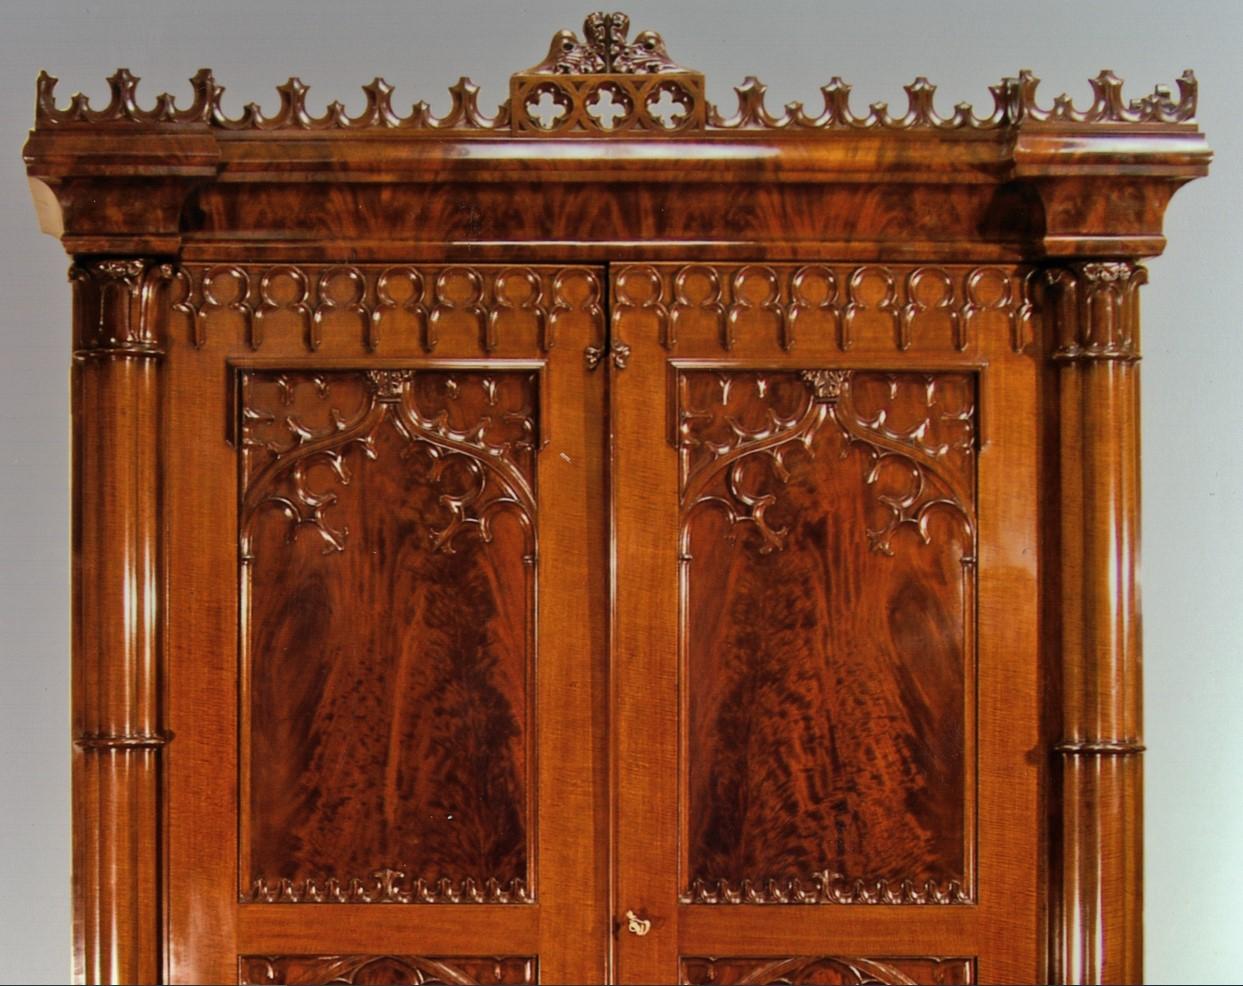 FAPG 19959D/2
Gothic Revival armoire
New York, about 1835-1840
Mahogany, with brass hardware
Measure: 104 in. high, 73 in. wide, 30 in. deep

Exhibited: Hirschl & Adler Galleries, New York, 2011–12, The World of Duncan Phyfe: The Arts of New York,